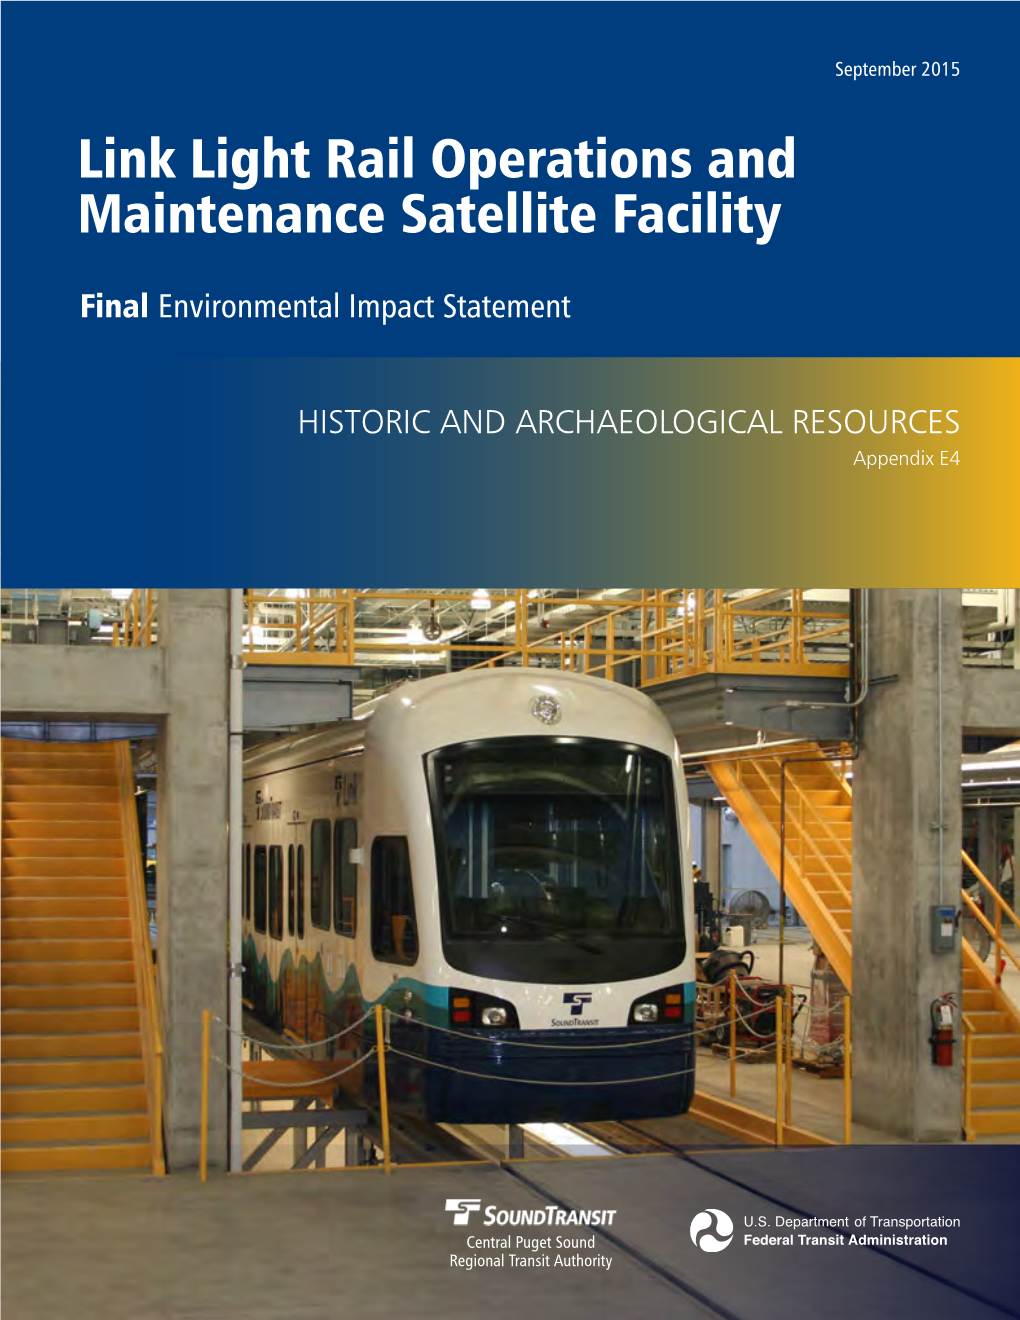 Link Light Rail Operations and Maintenance Satellite Facility